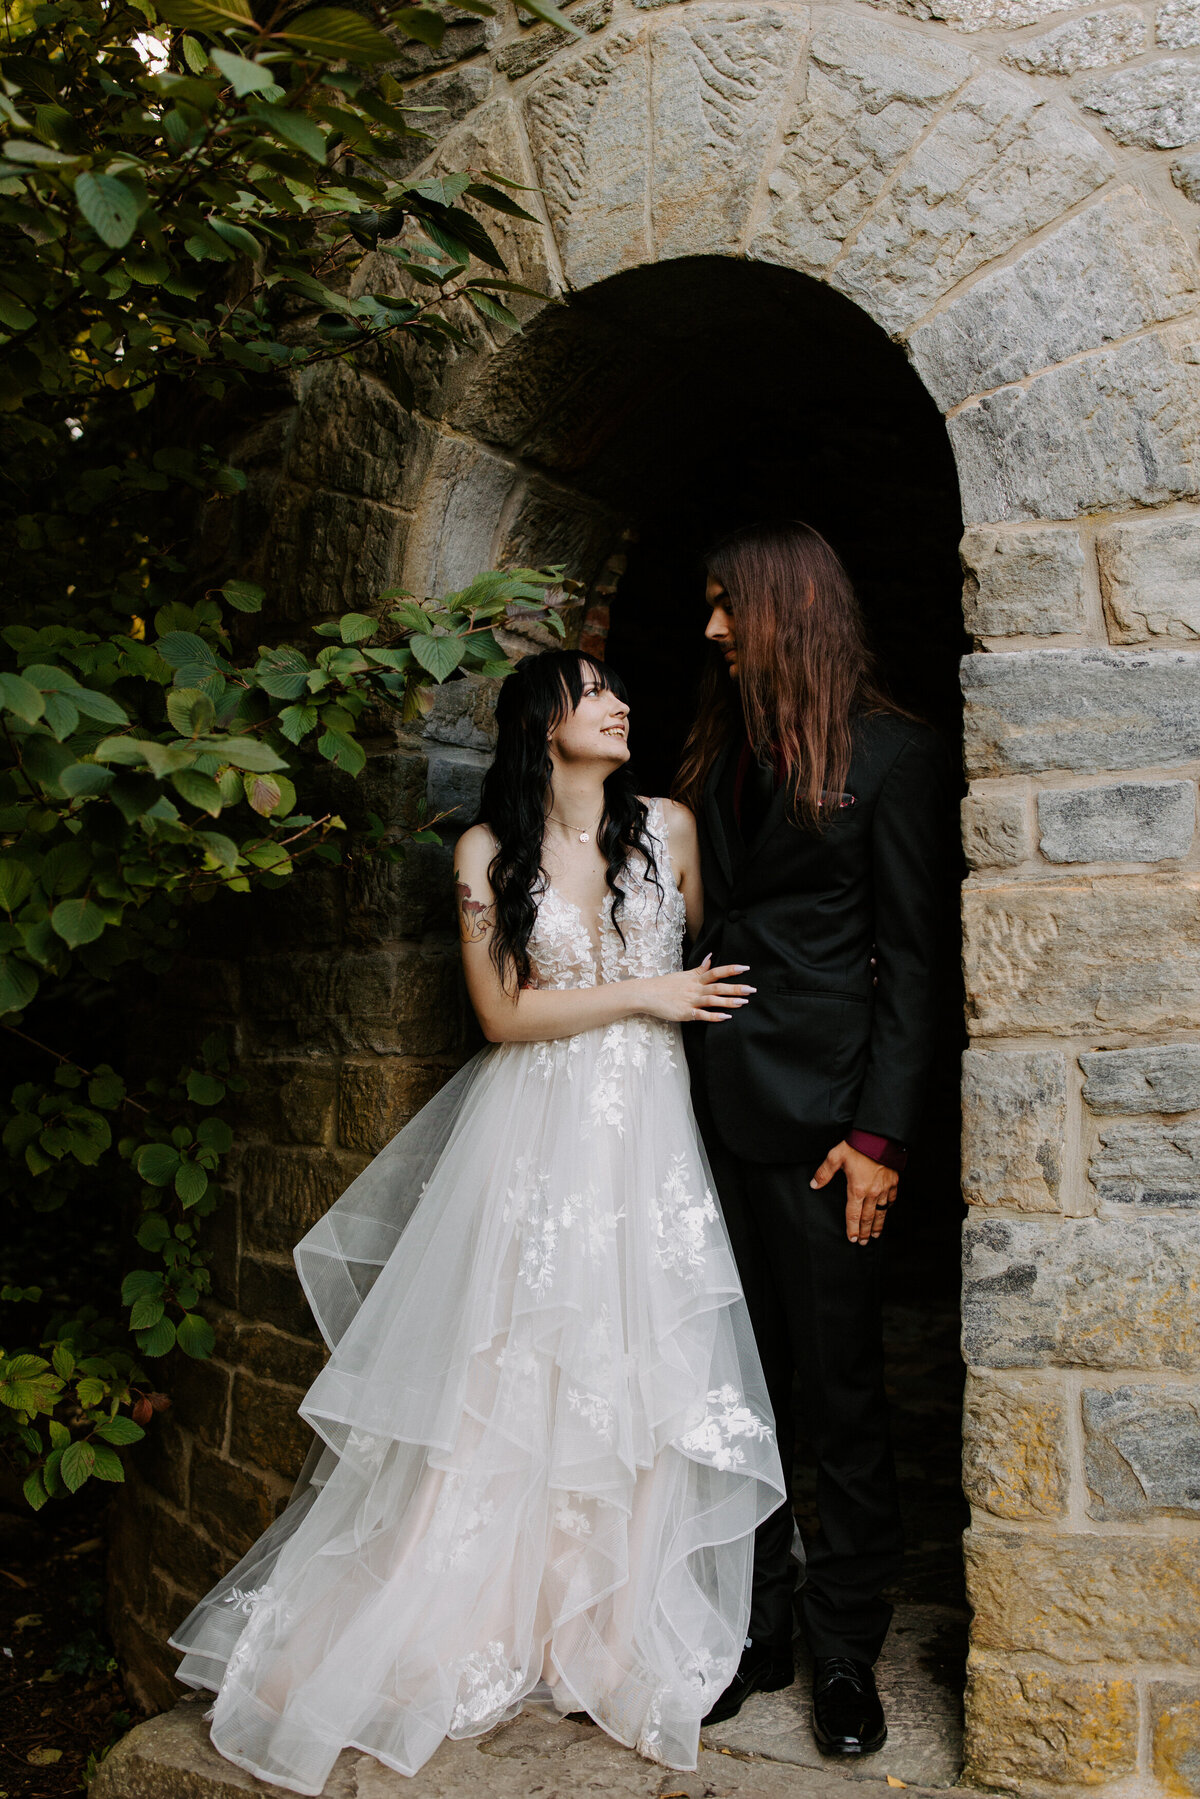 wedding couple standing next to each other smiling in a small archway